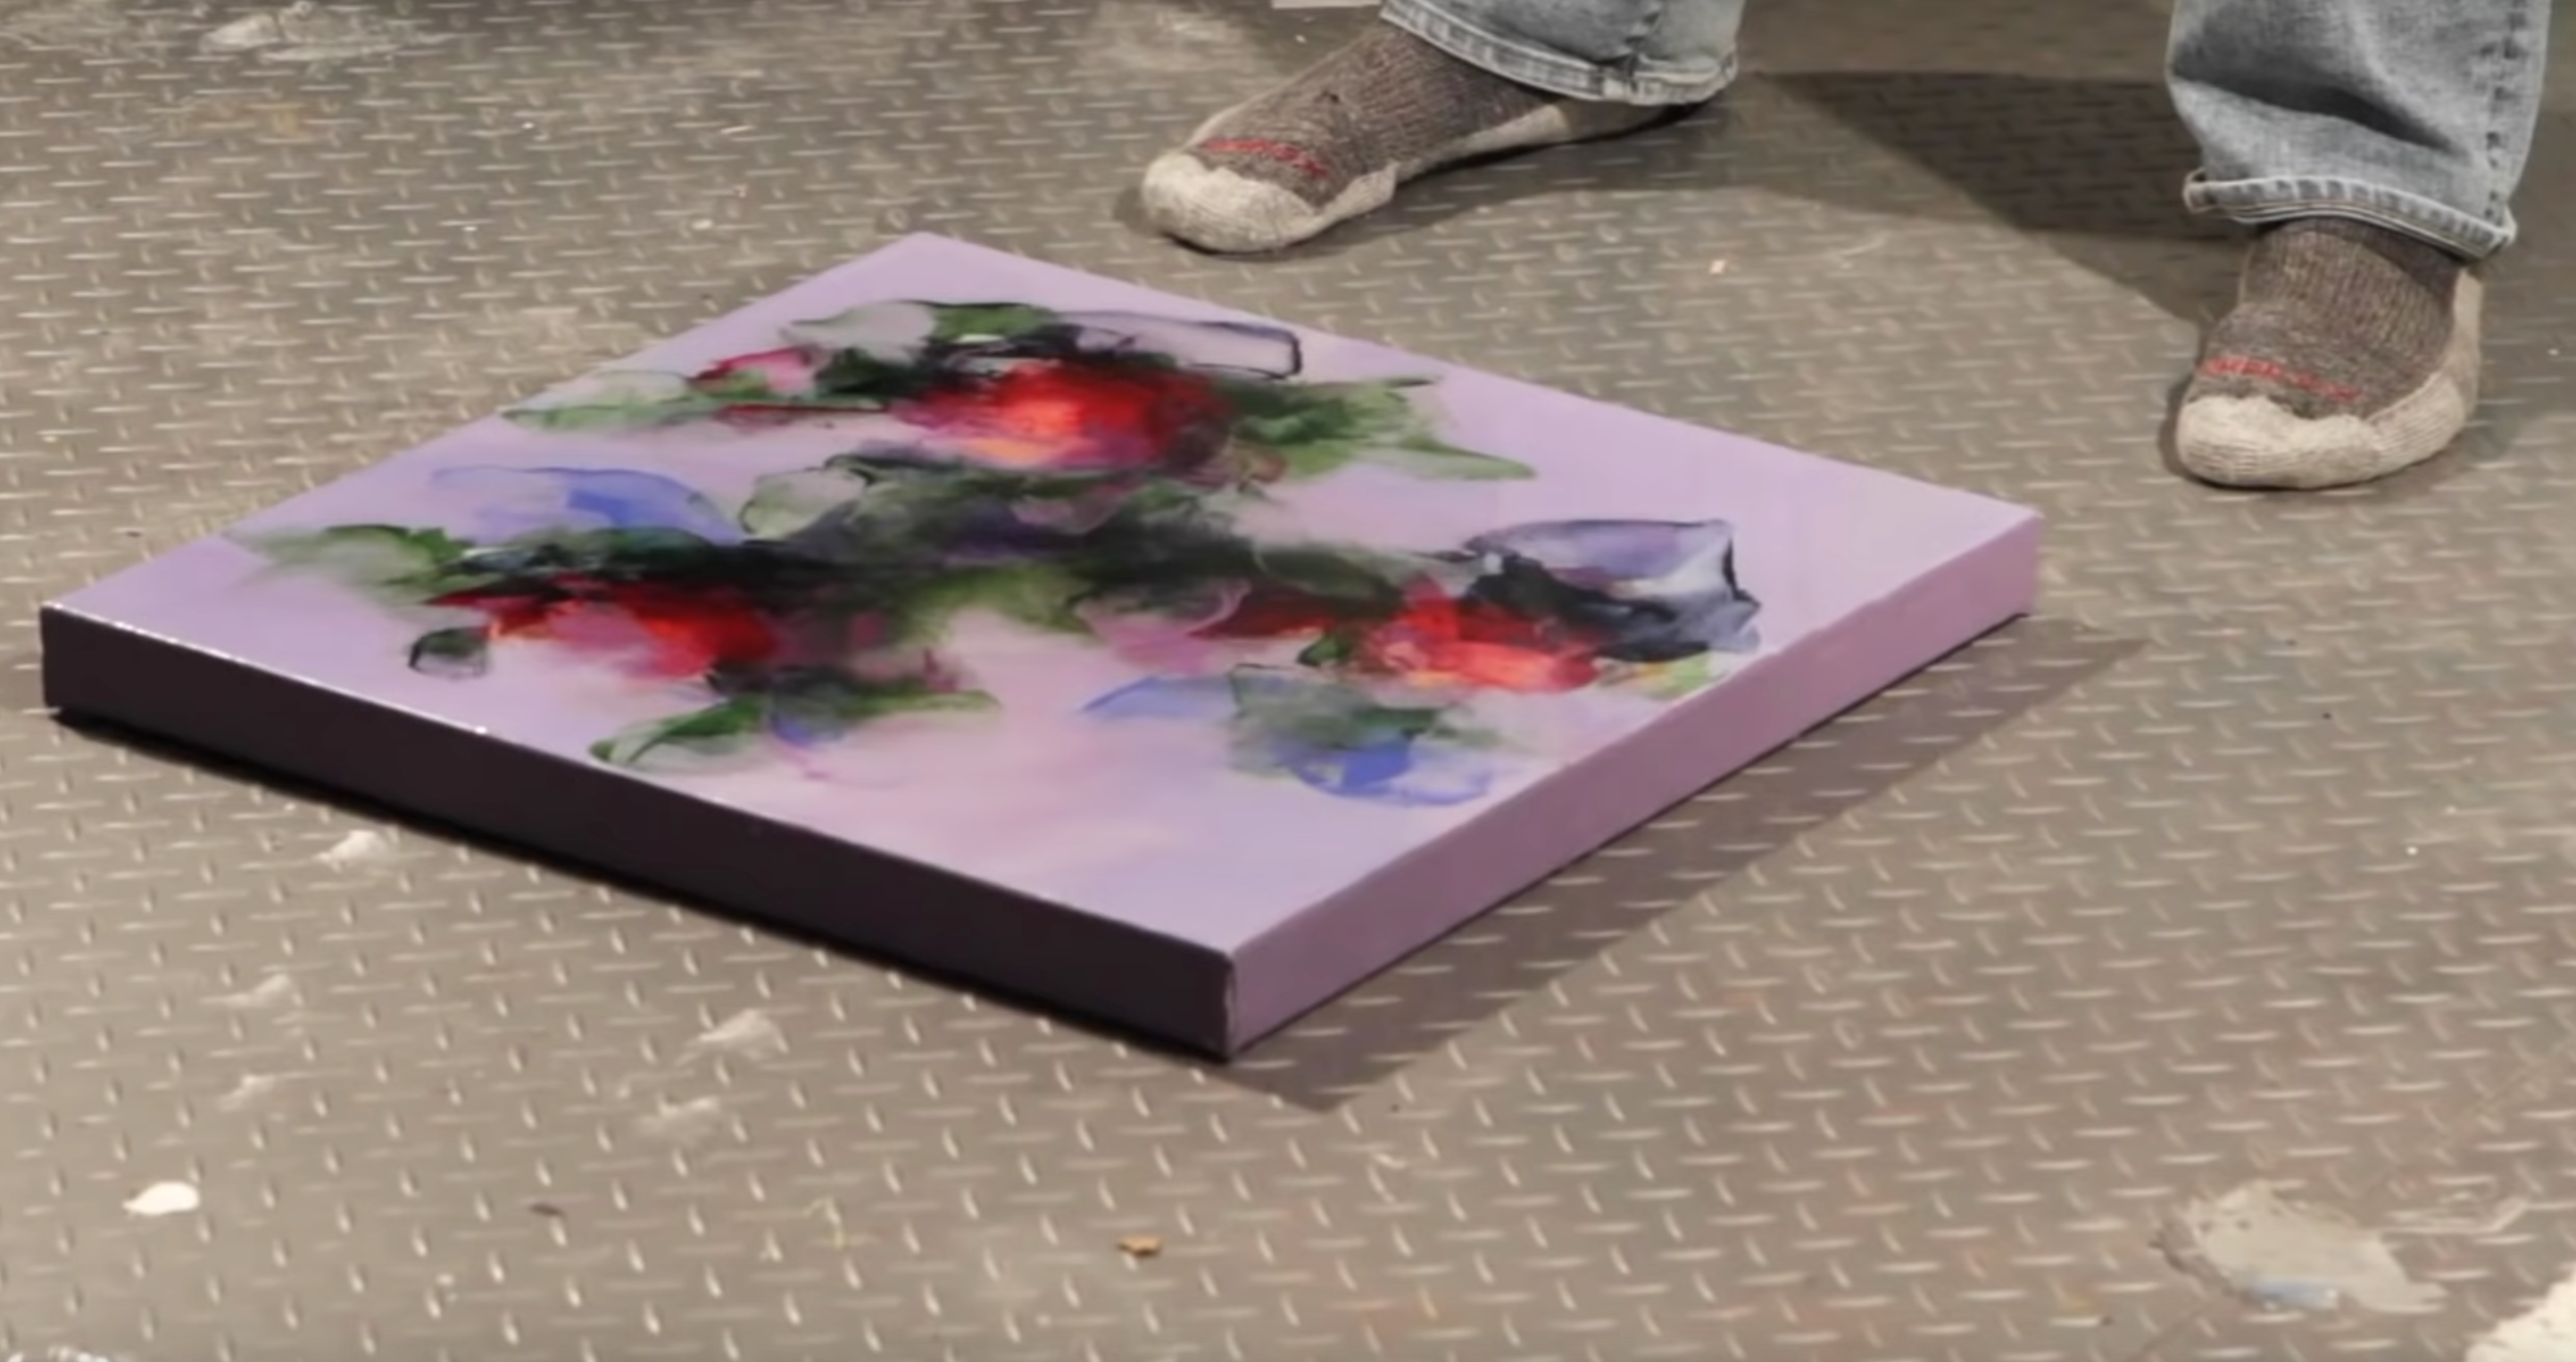 Photograph Your Resin Art Like A Pro - good option for photographing a small piece of artwork is to place it on the floor